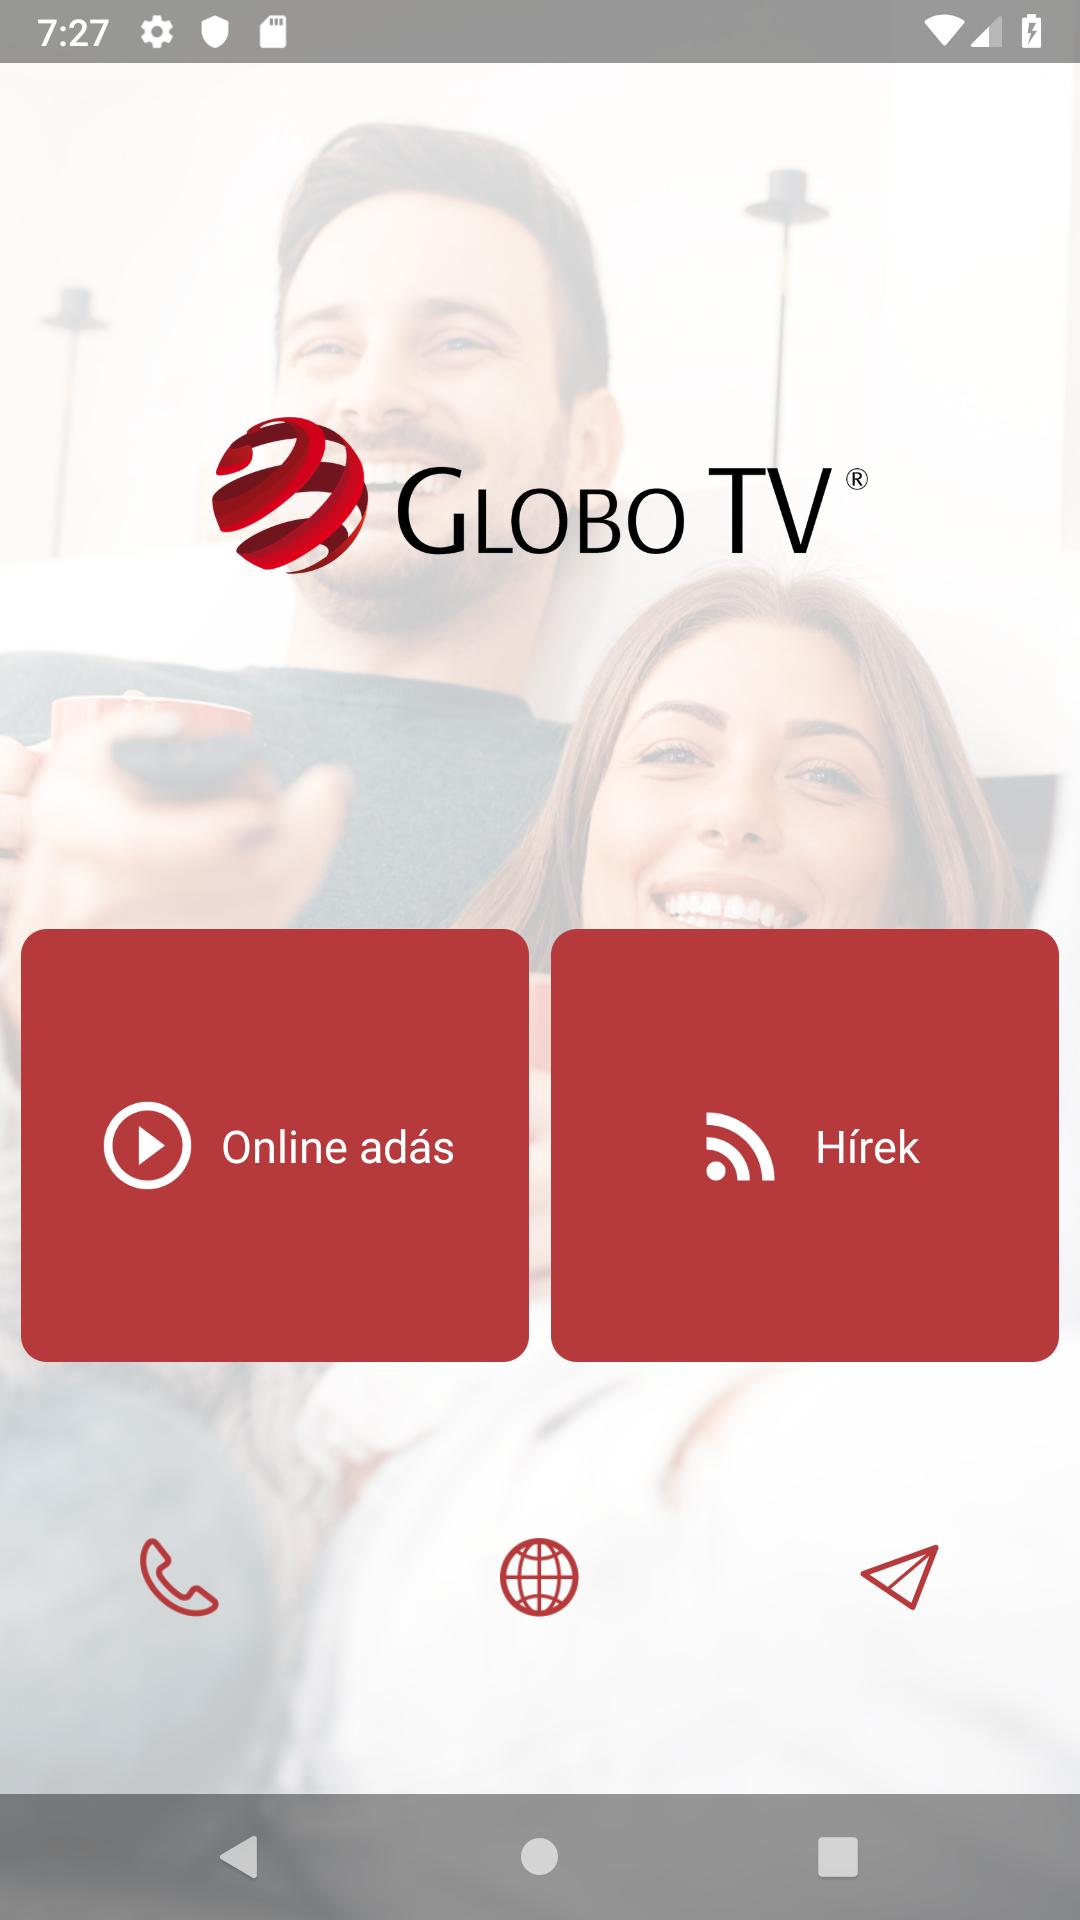 Globo TV for Android - APK Download